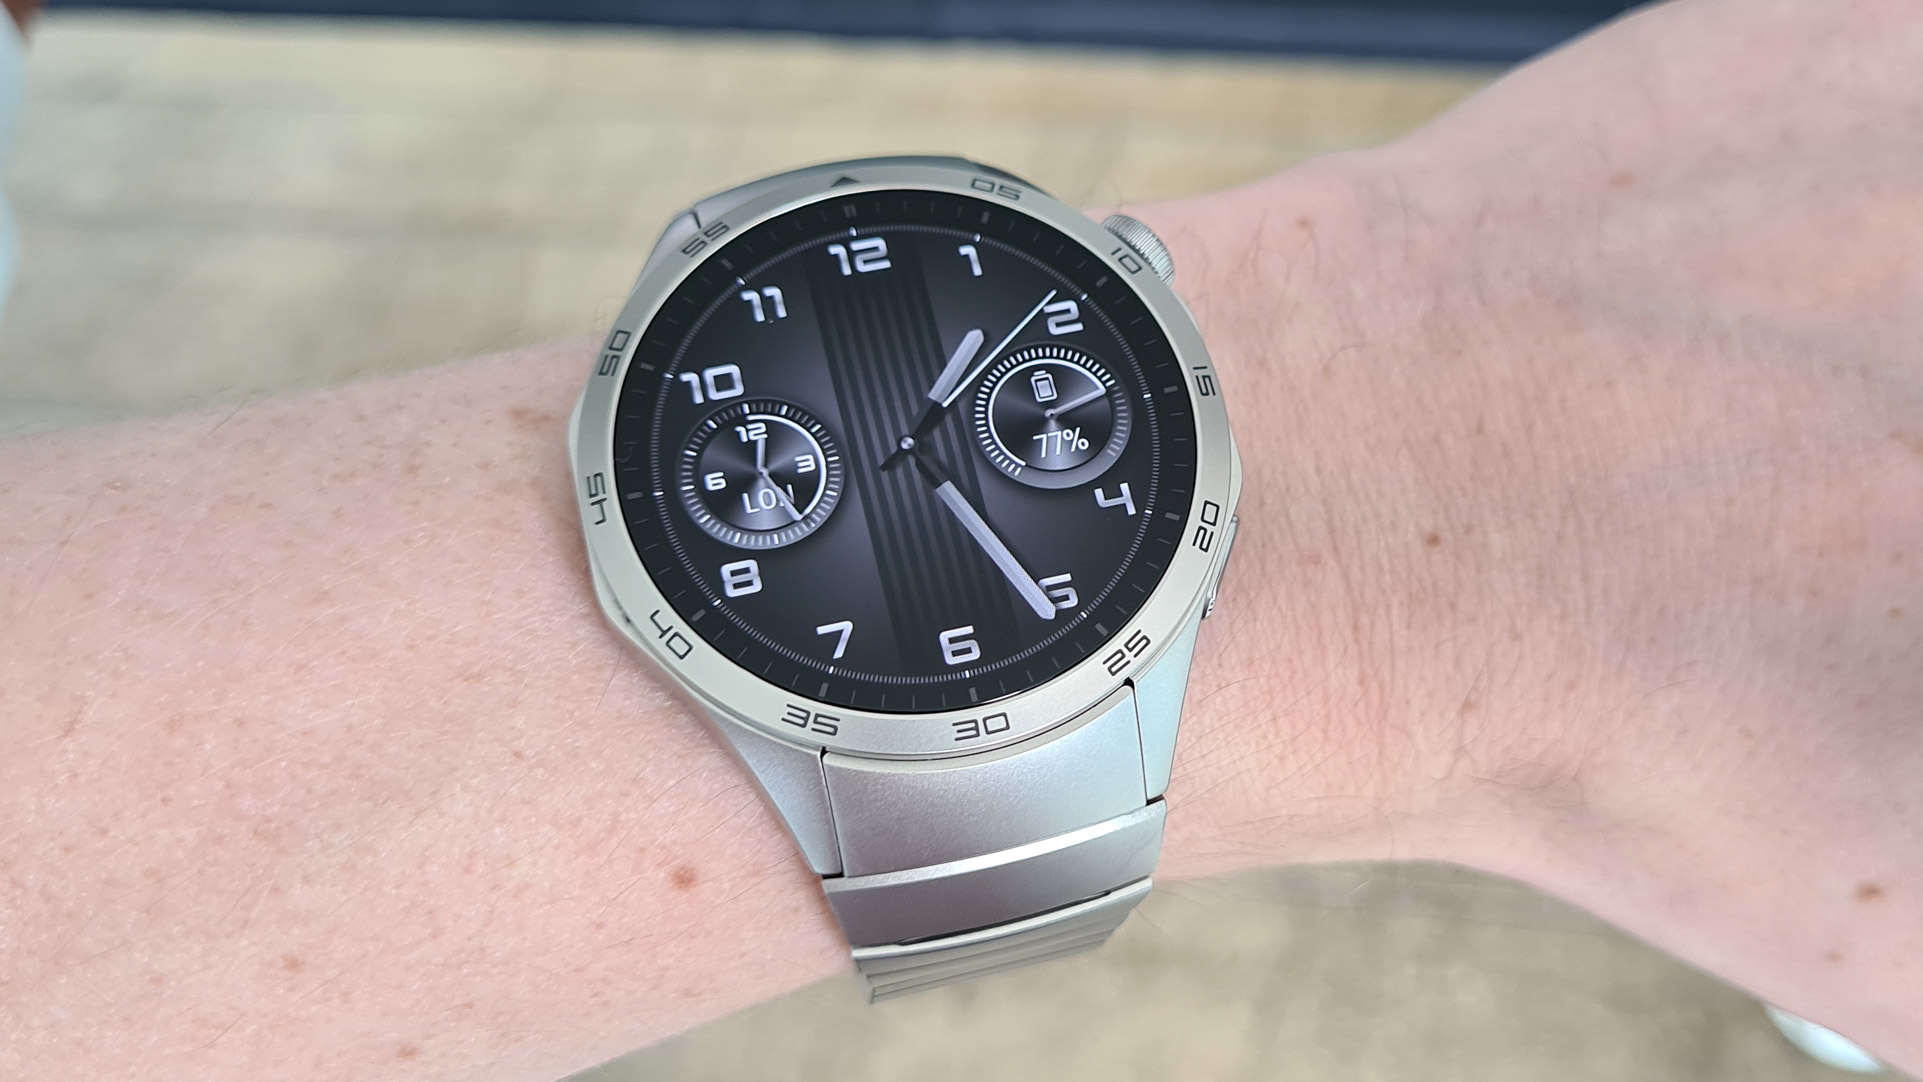 Huawei Watch GT 4 review: Further refined